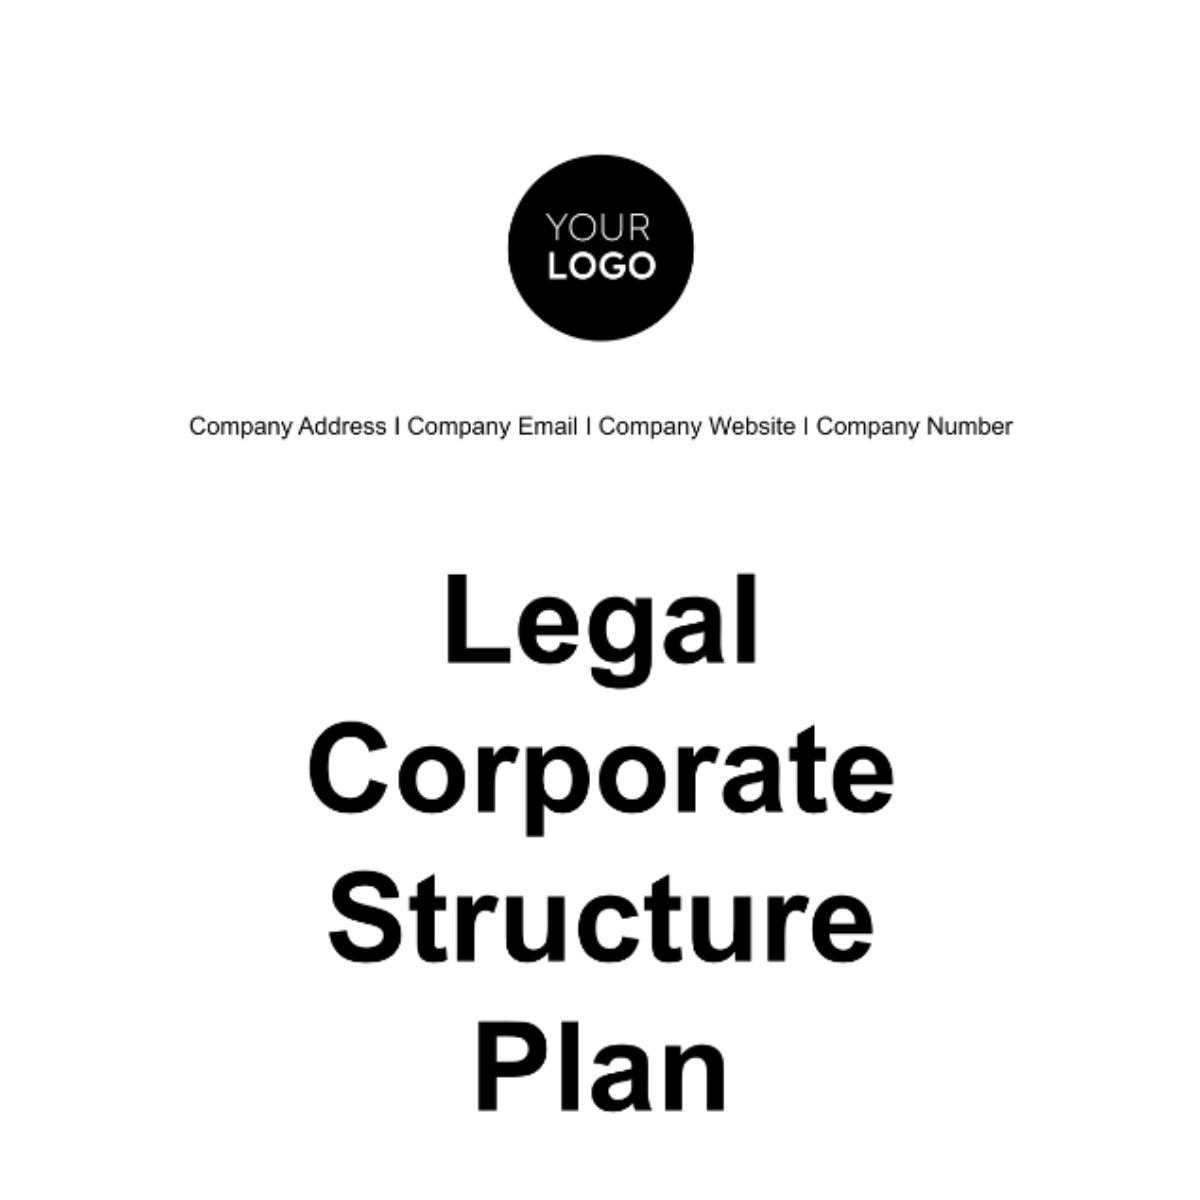 Free Legal Corporate Structure Plan Template